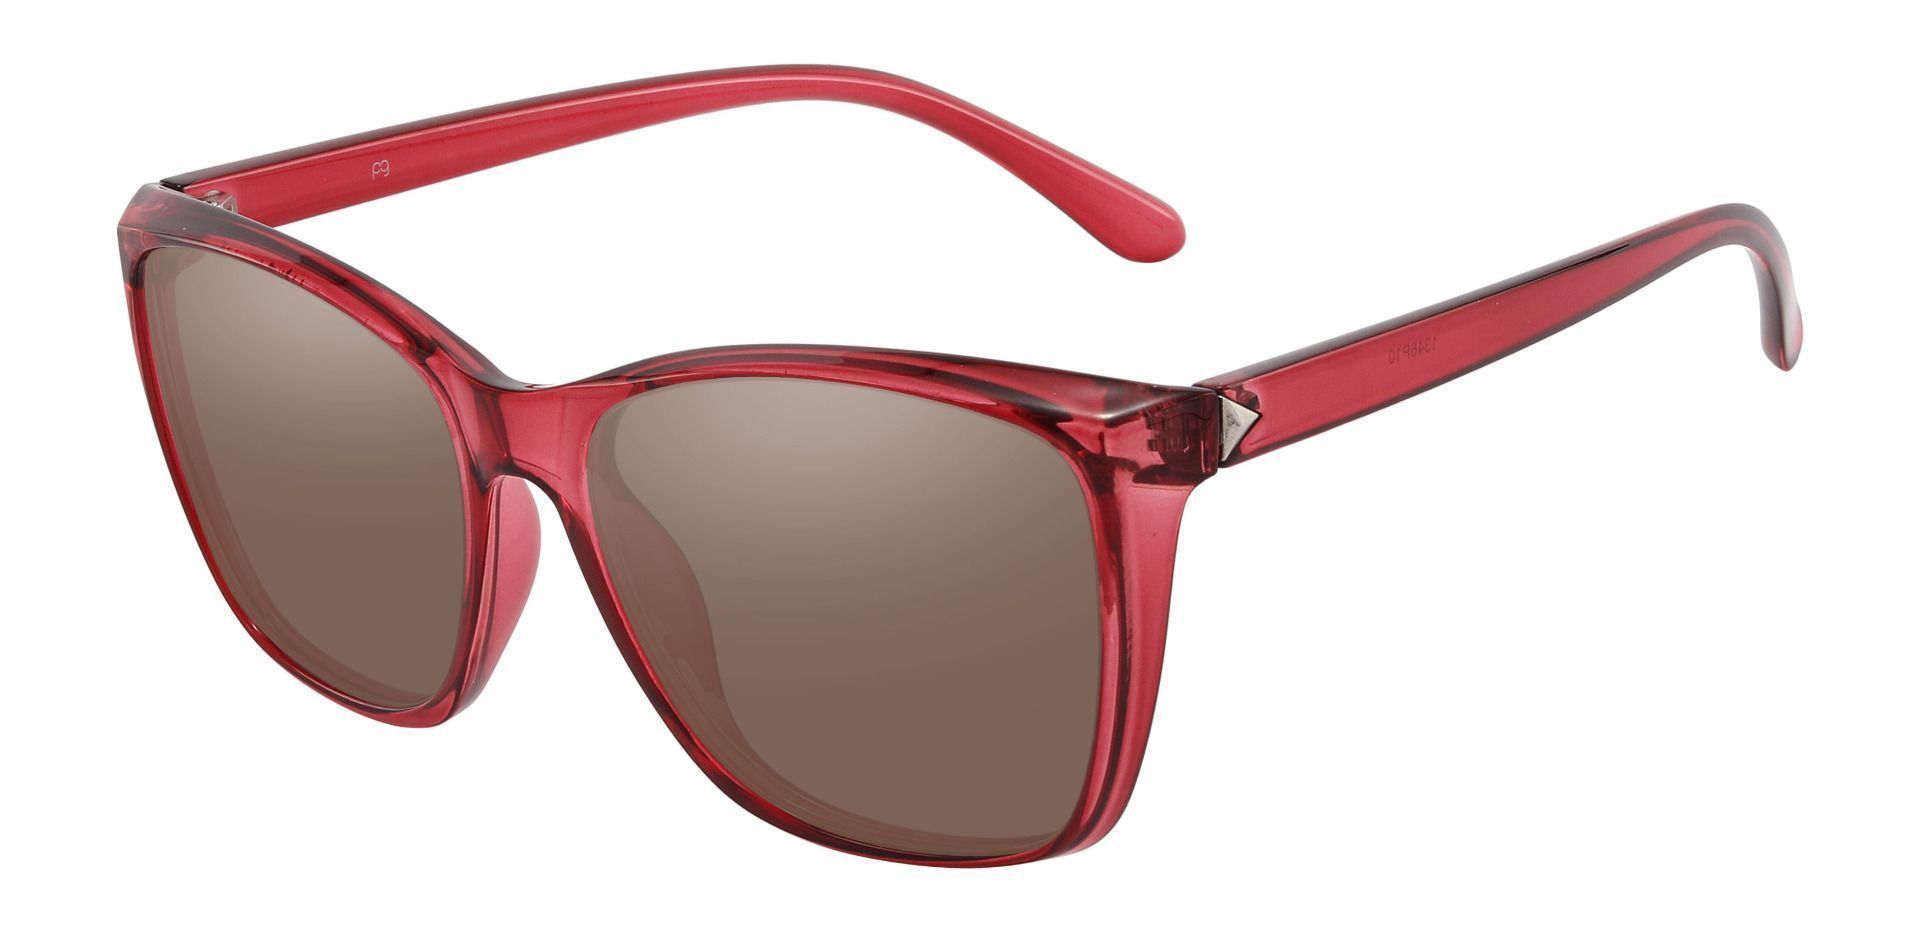 Taryn Square Prescription Sunglasses - Red Frame With Brown Lenses